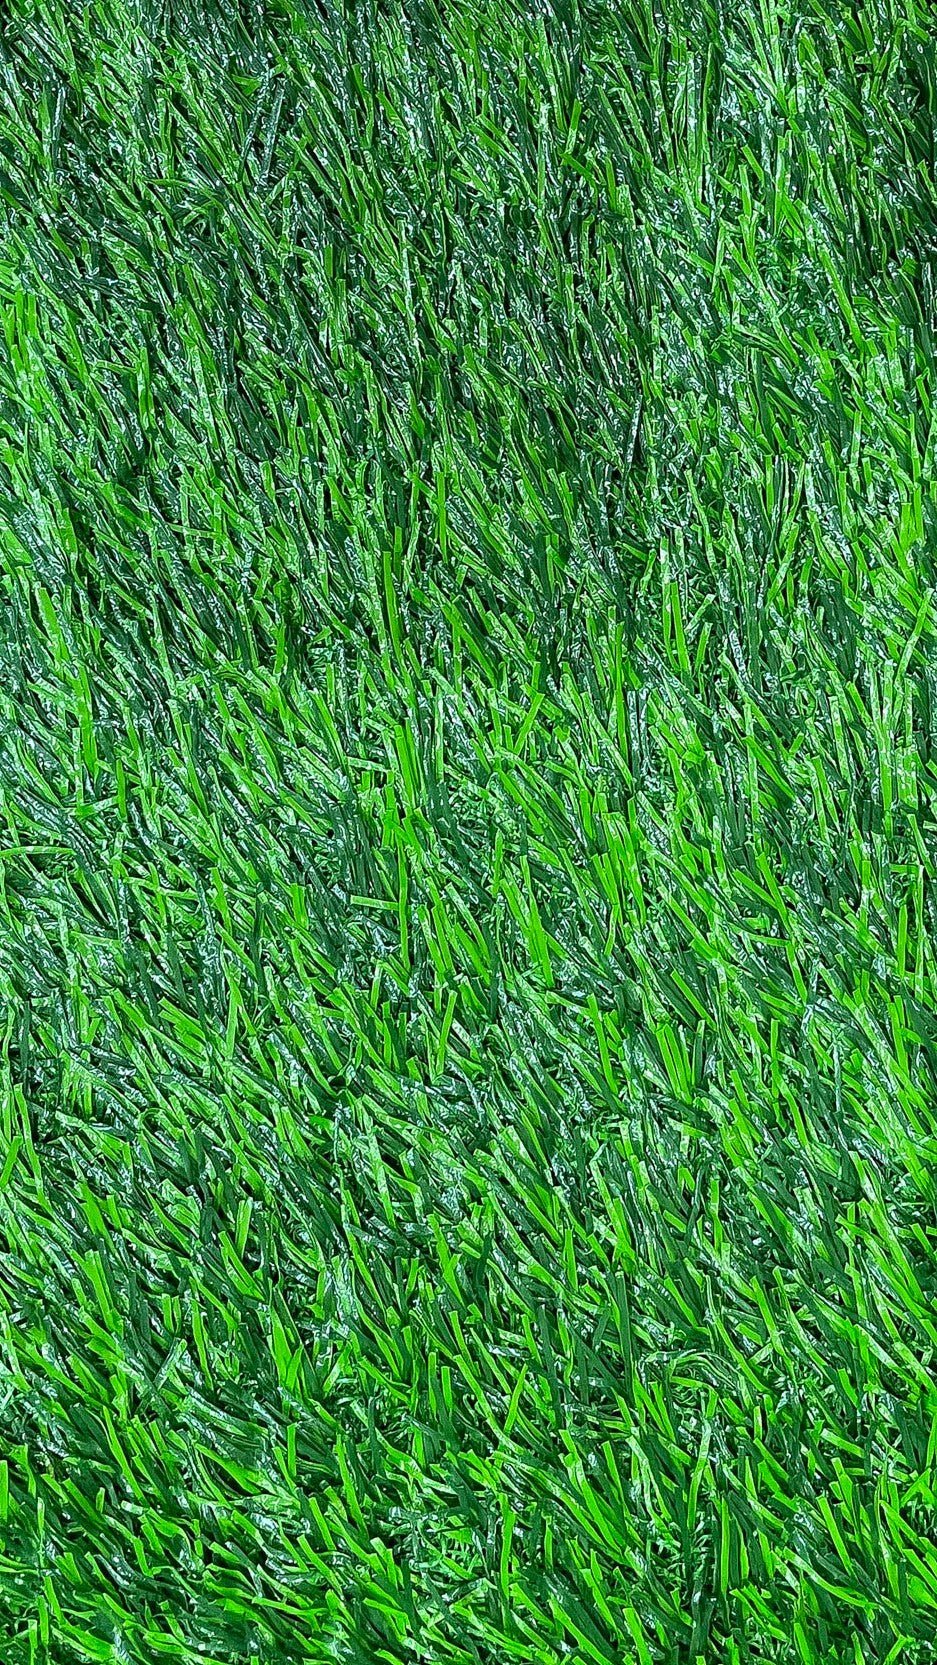 40 MM Grass Bouncer Artificial Grass for Indoor and Outdoor Use, Soft and Lush Natural Looking - V Surfaces